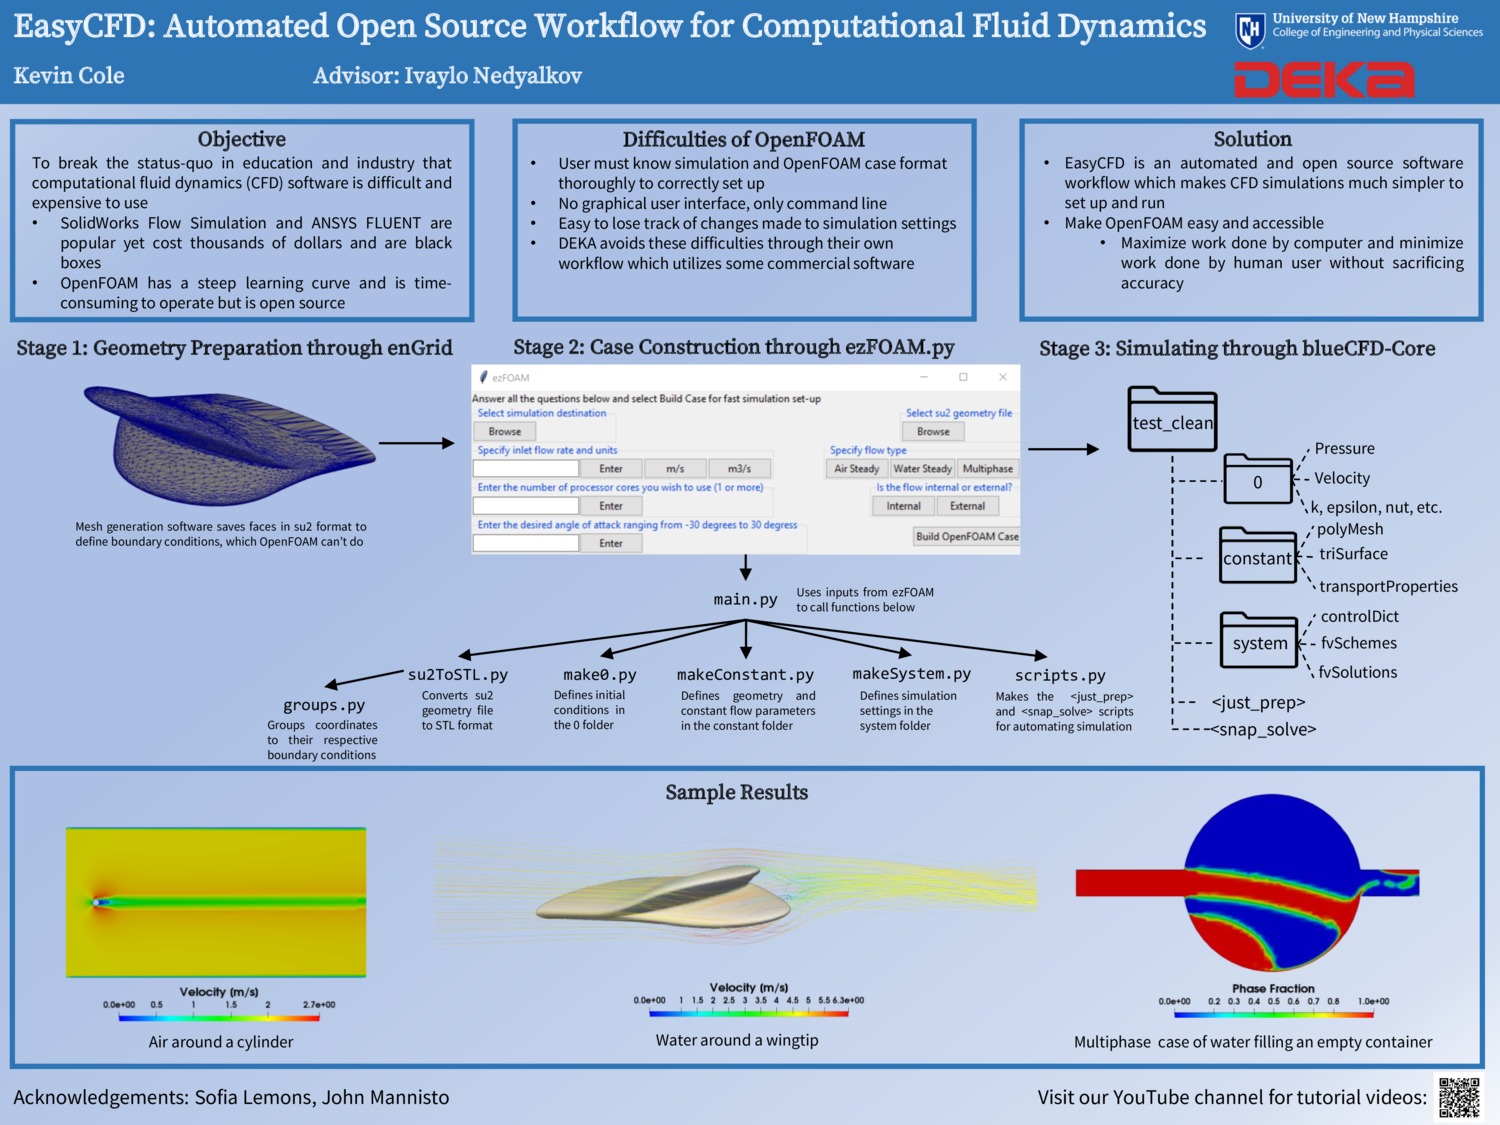 Easycfd: Automated Open Source Workflow For Computational Fluid Dynamics by kc1037